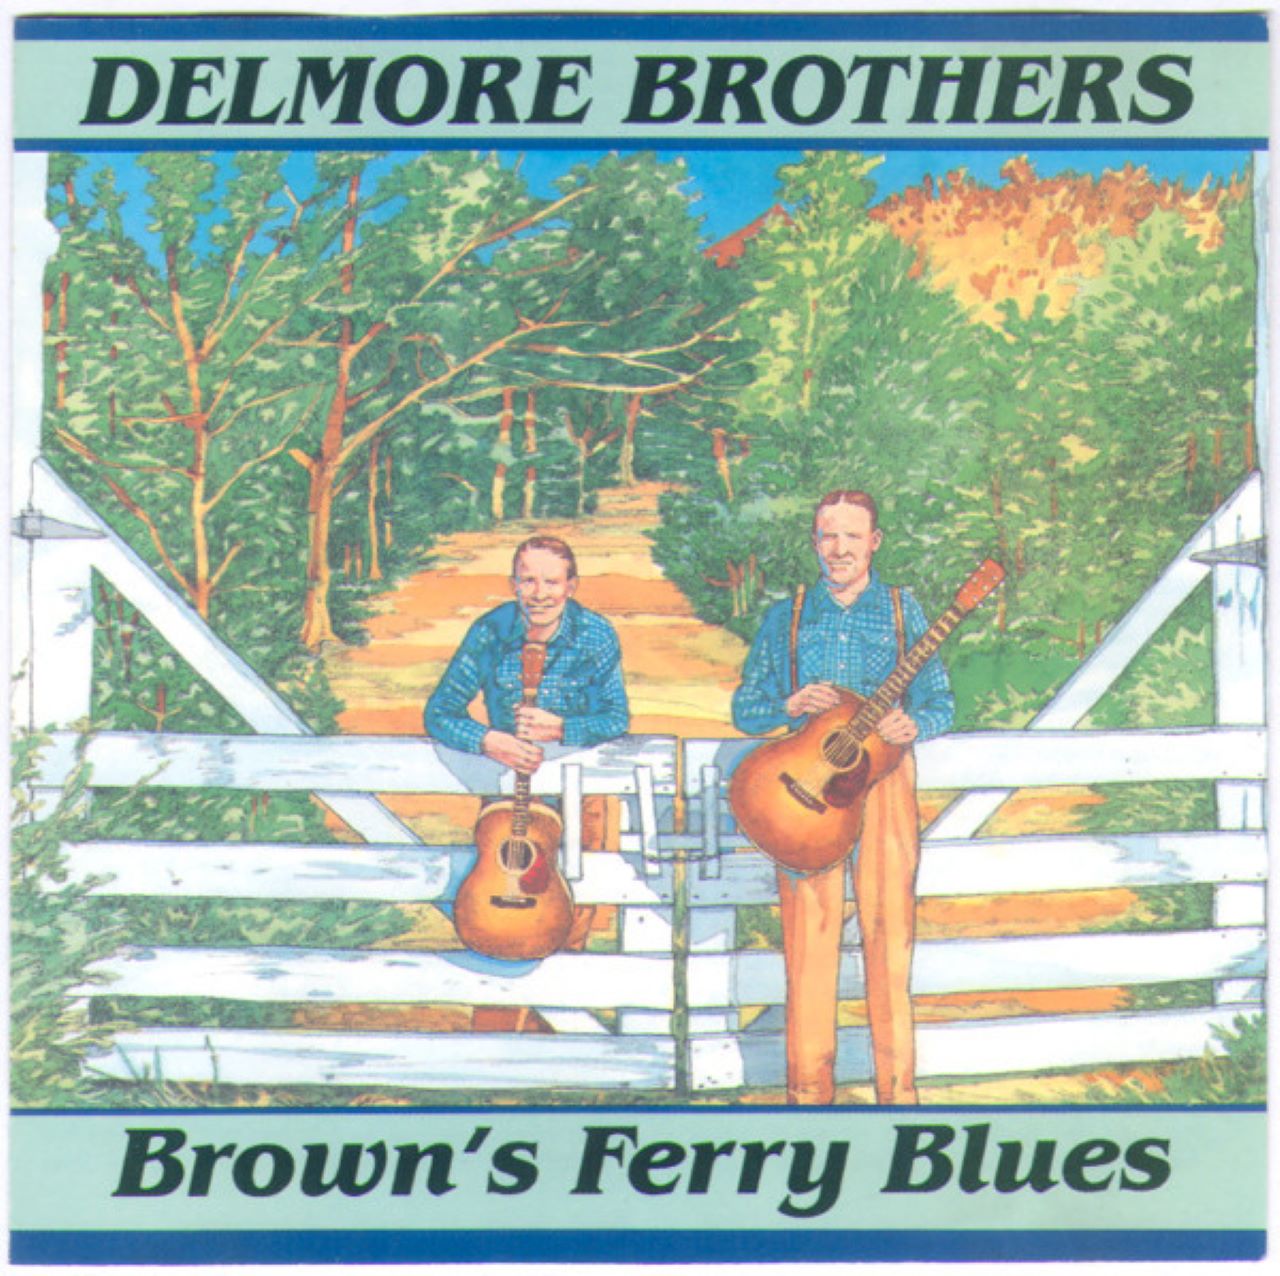 Delmore Brothers - Brown's Ferry Blues cover album